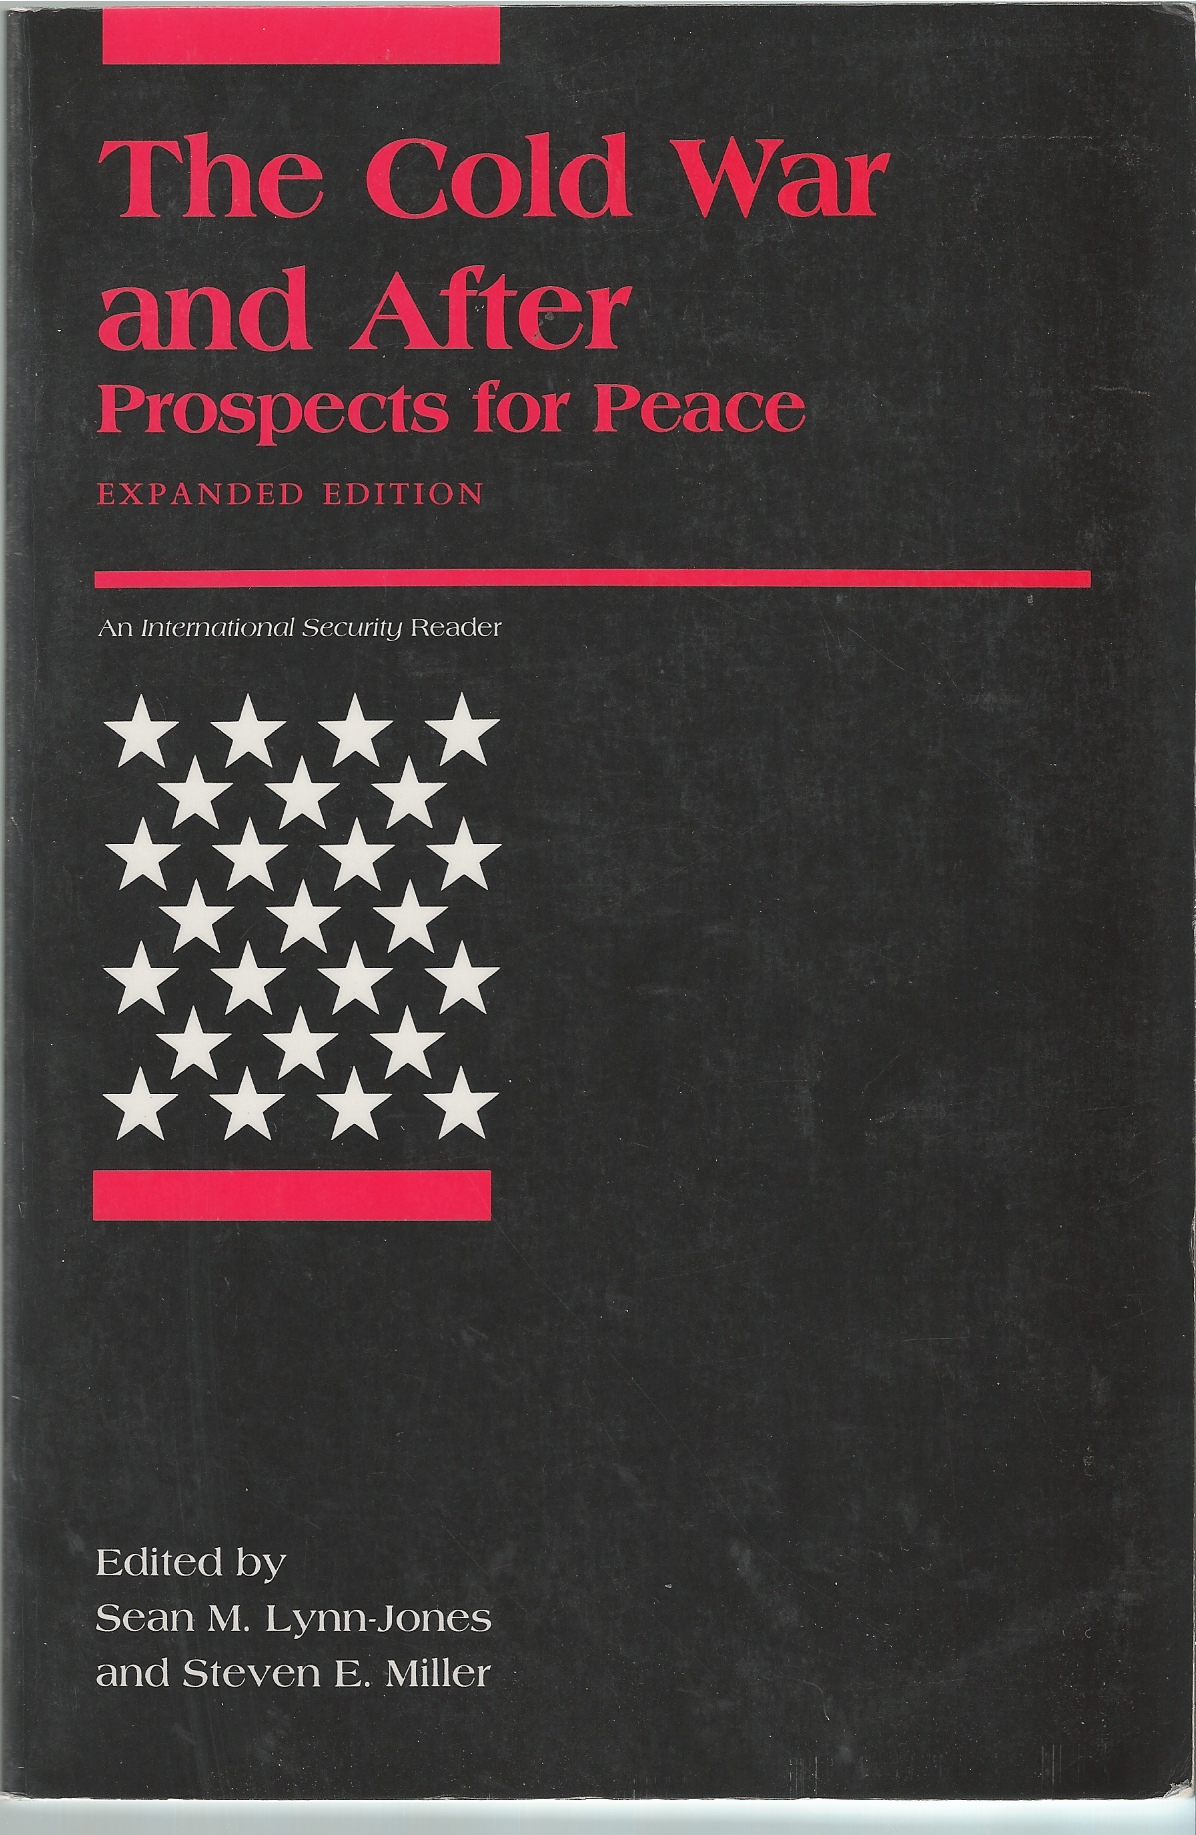 LYNN-JONES, SEAN & STEVEN E. MILLER - Cold War and After, the Prospects for Peace